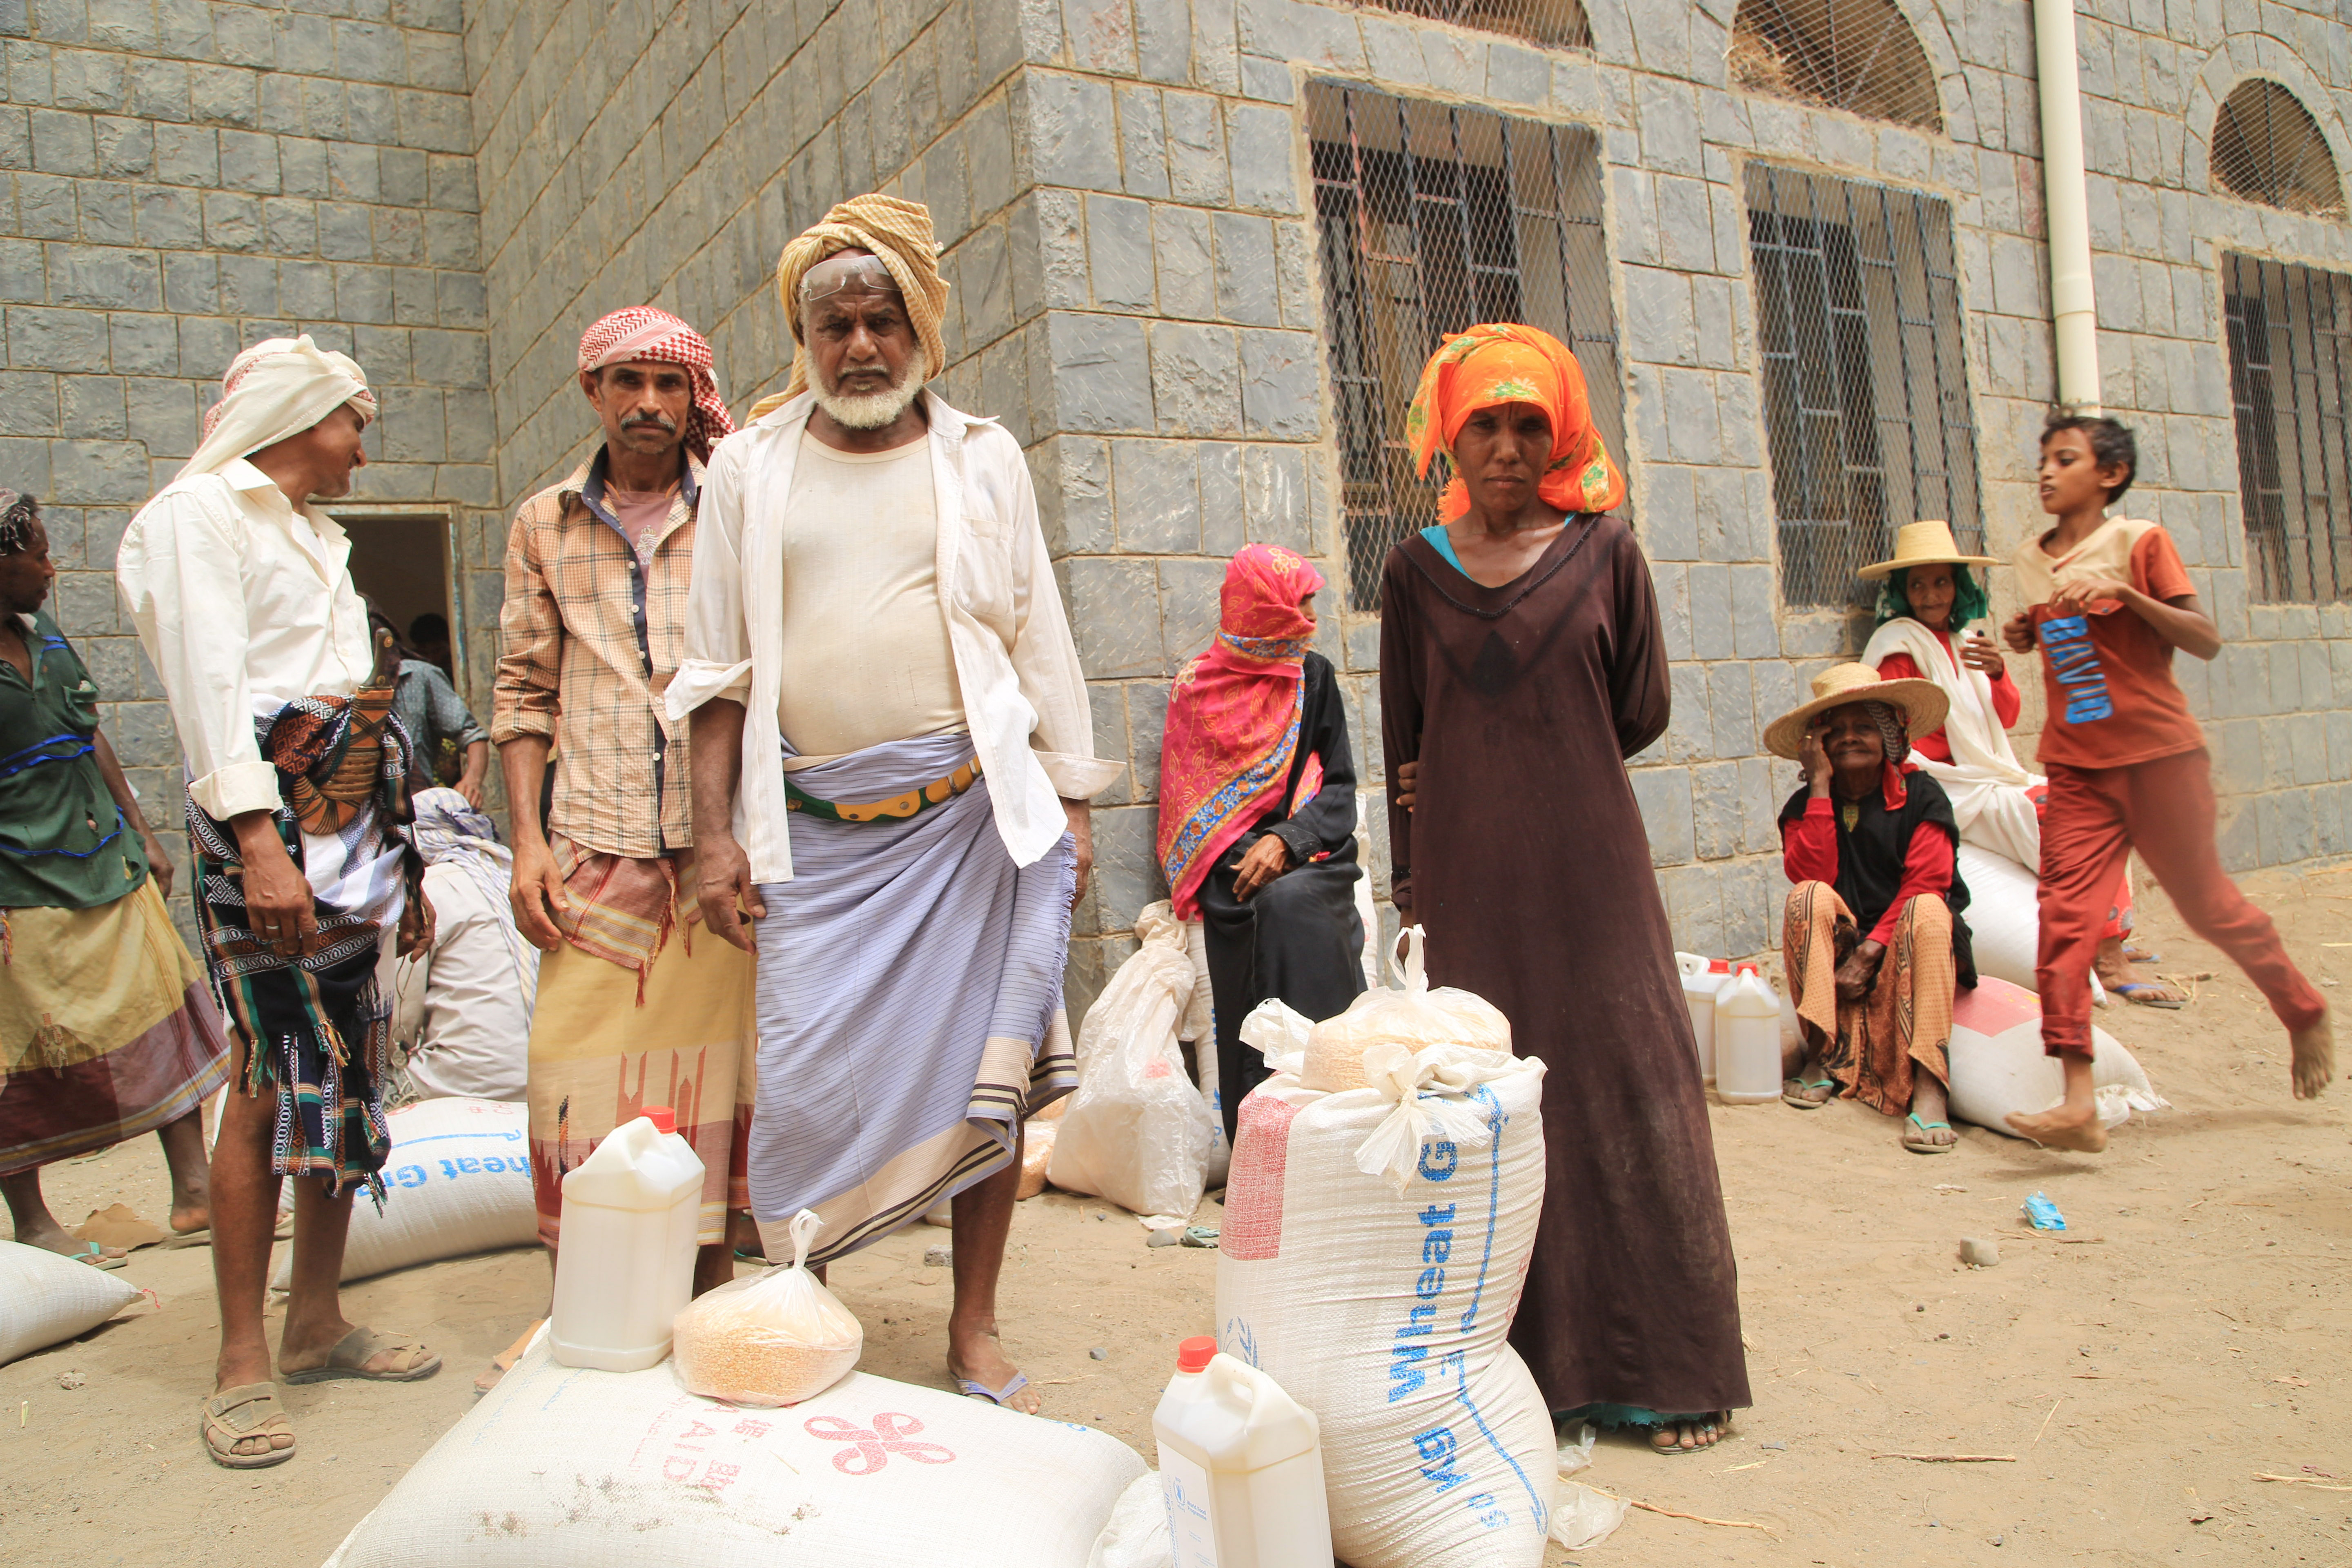 WFP delivers food to families in Yemen suffering malnutrition from famine